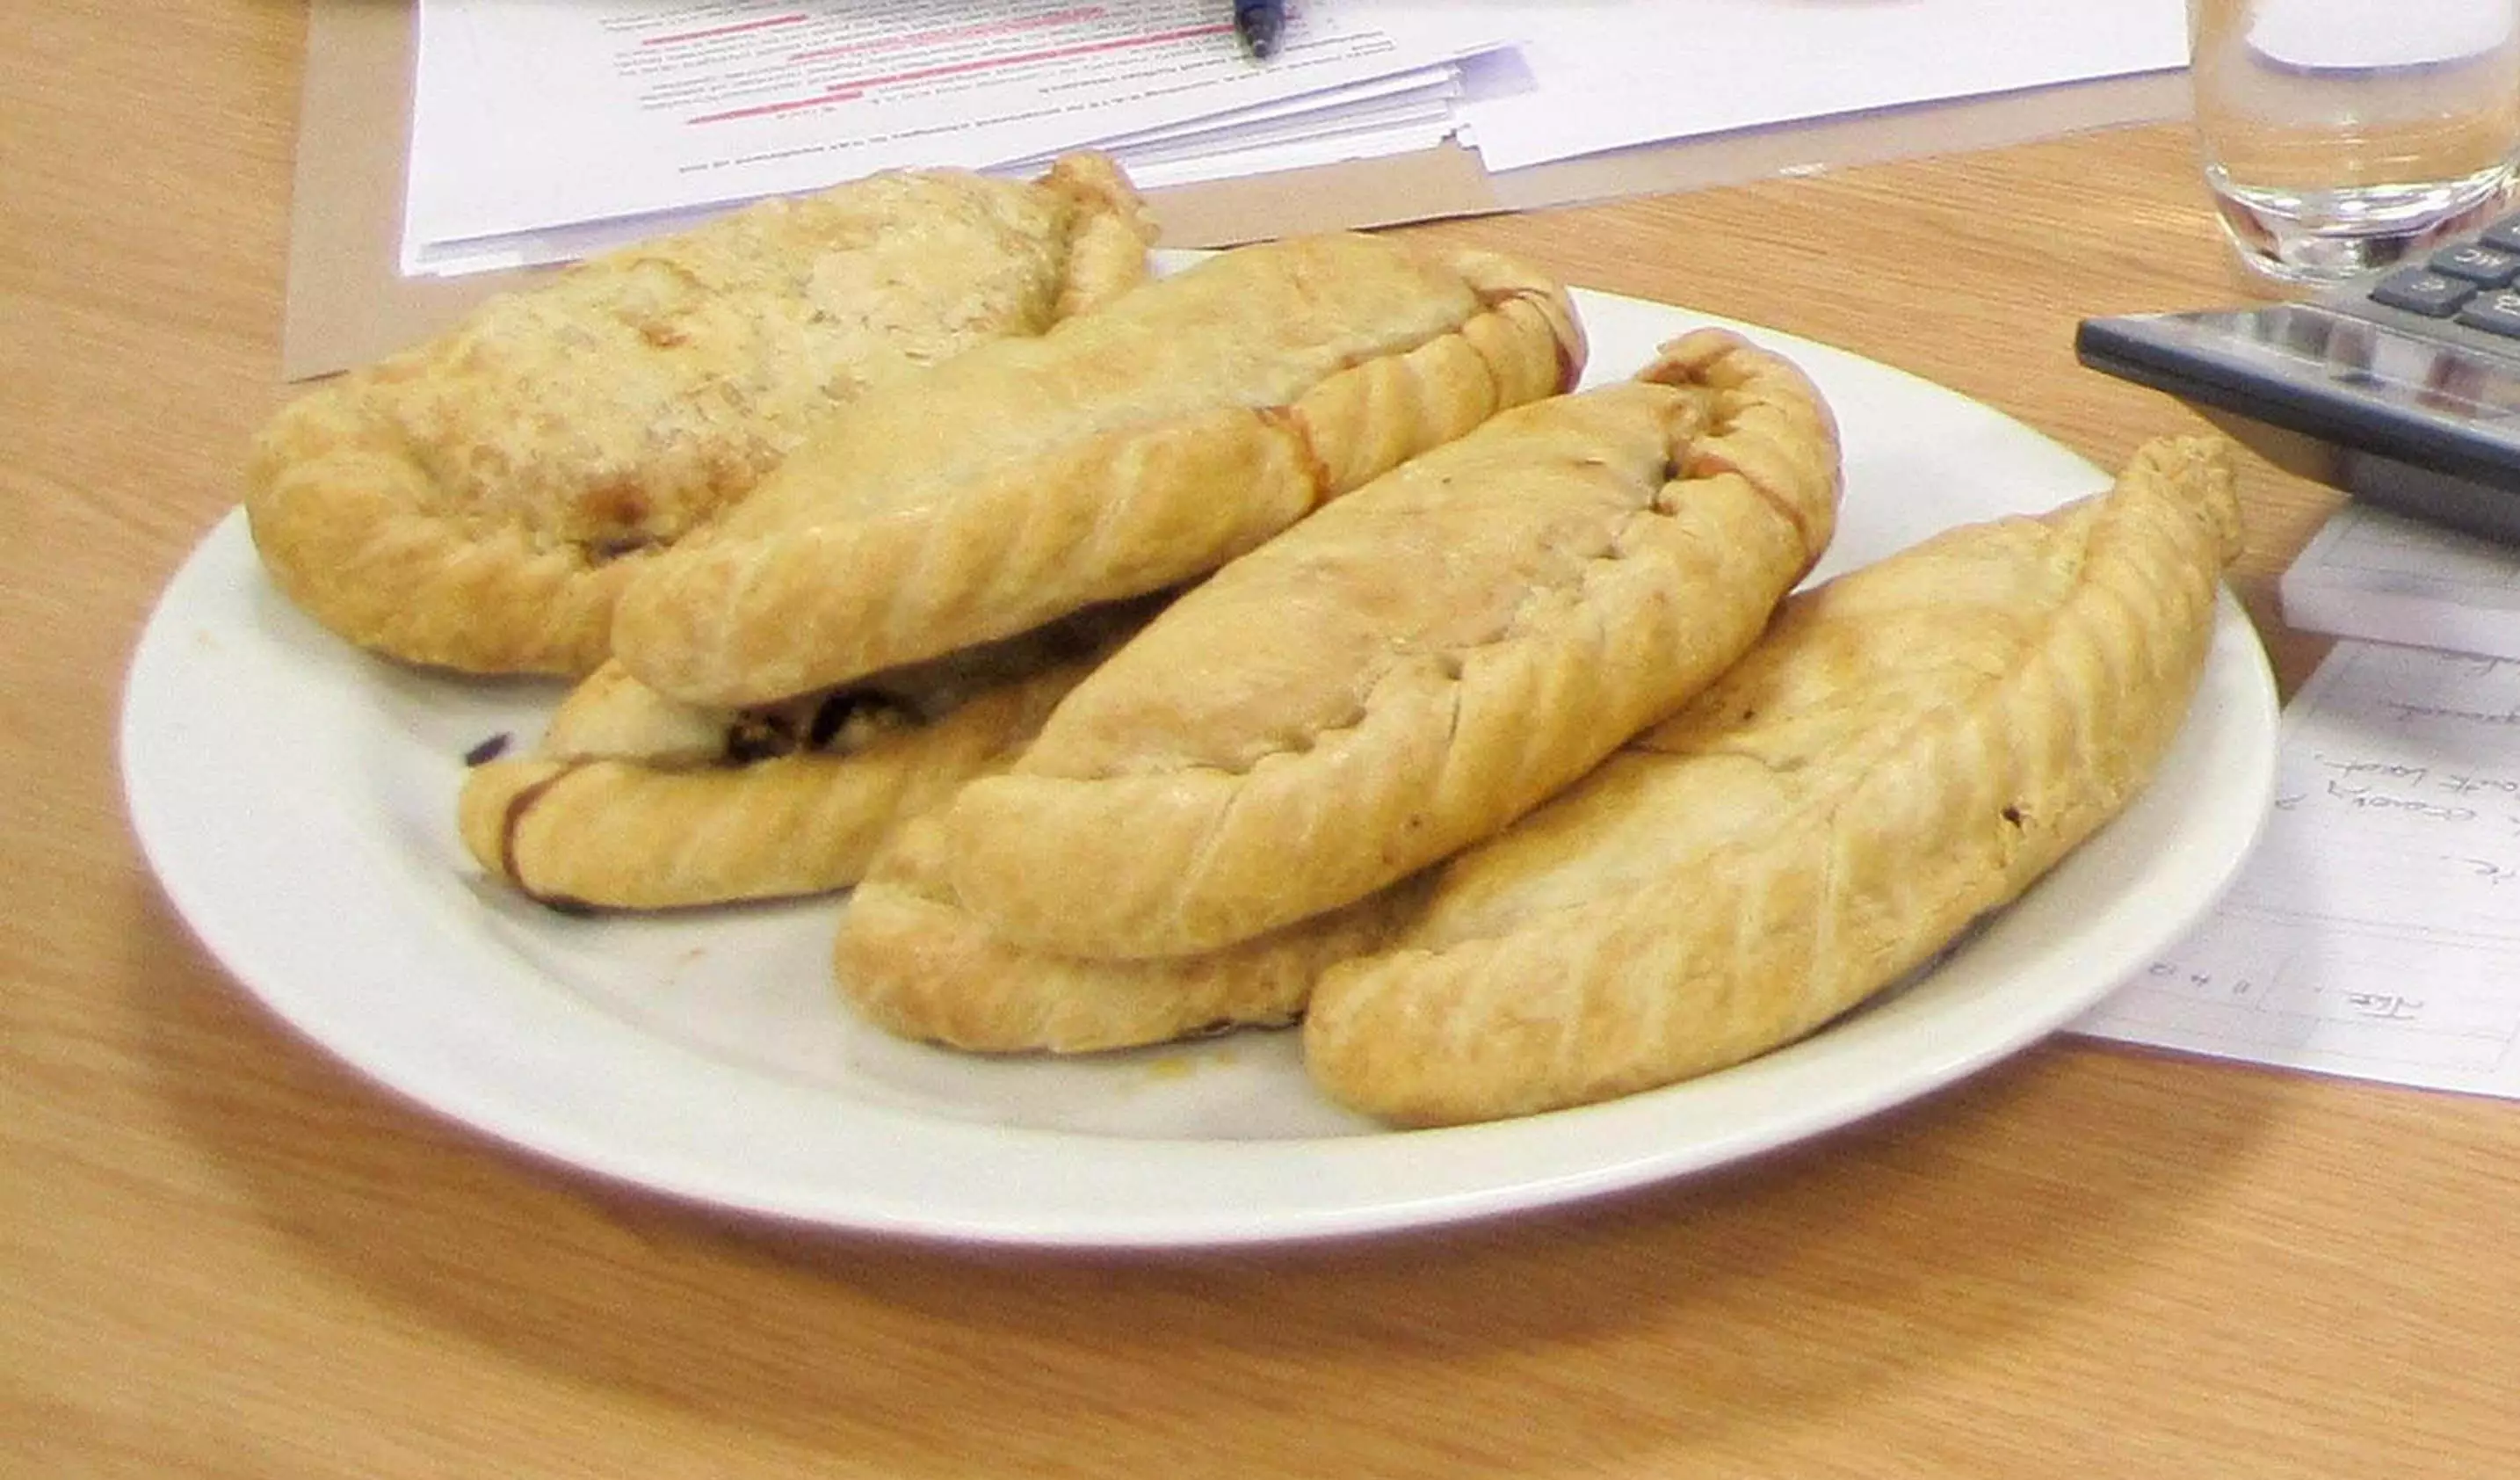 According to a friend, the pasties remind him of his childhood in Cornwall.